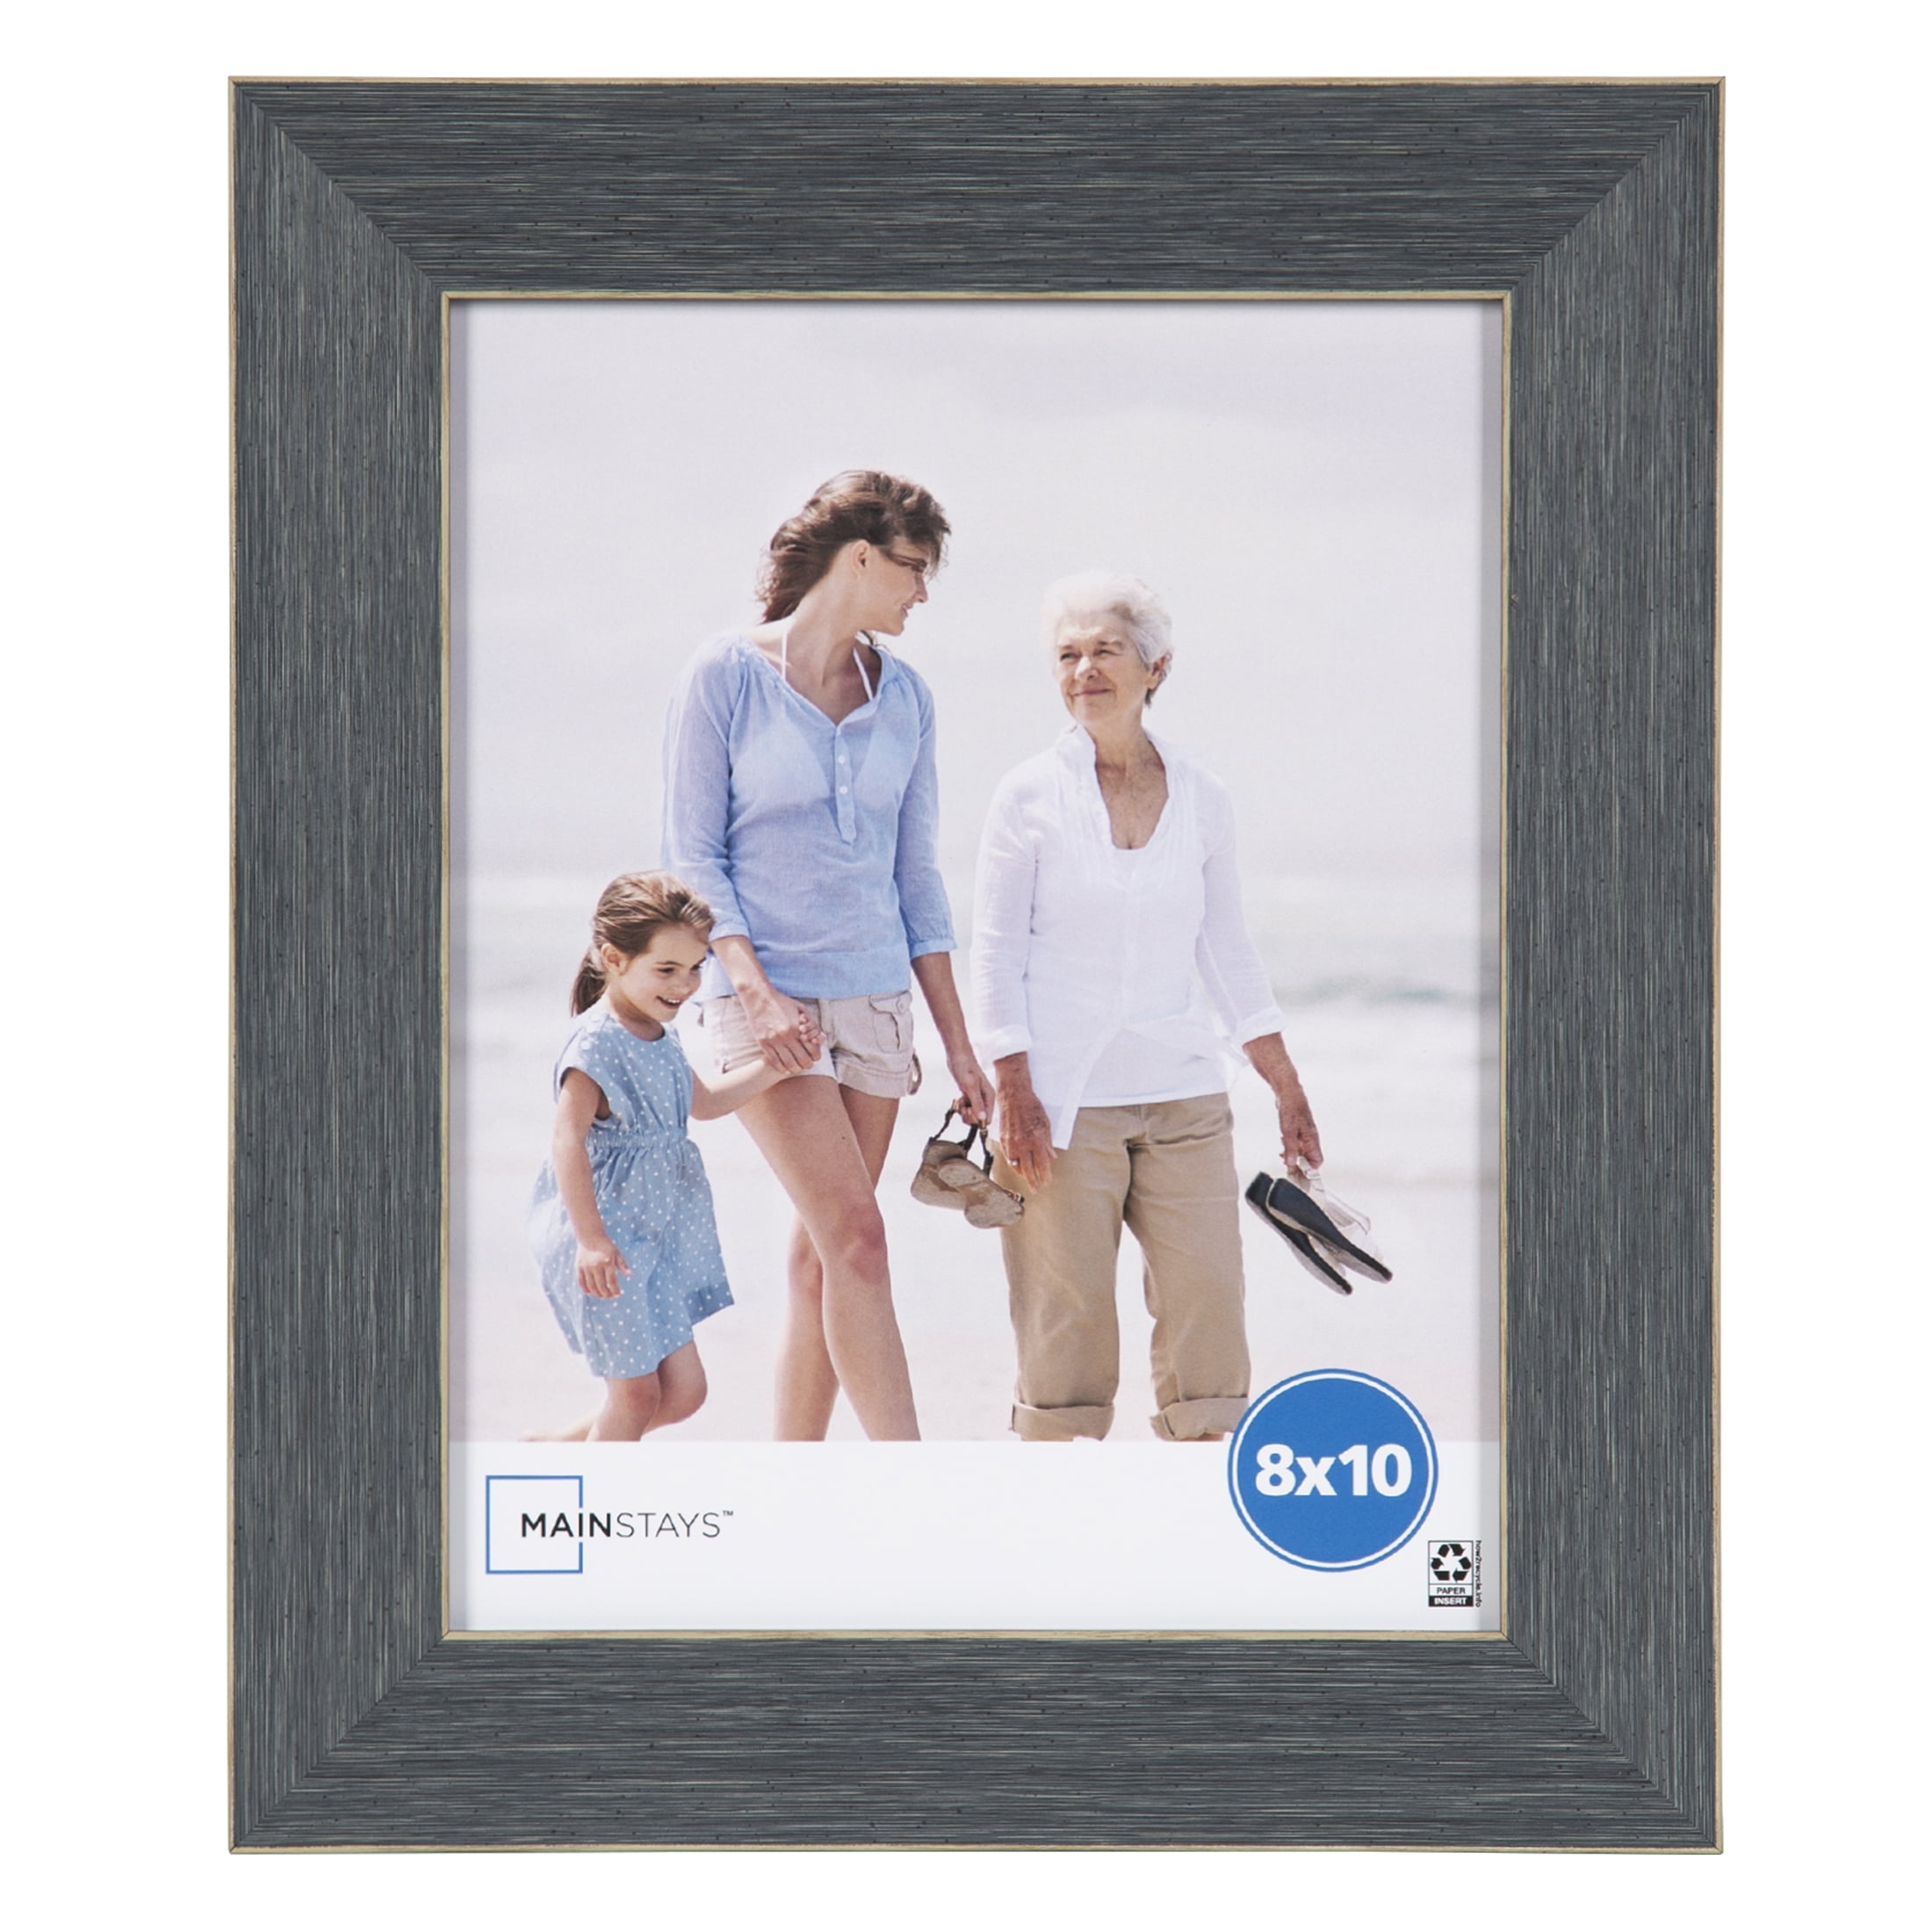 Mother/'s Day Gift Picture Frame Embellished Picture Frame with Bow-CHOOSE your Size 4x6 8x10 5x7